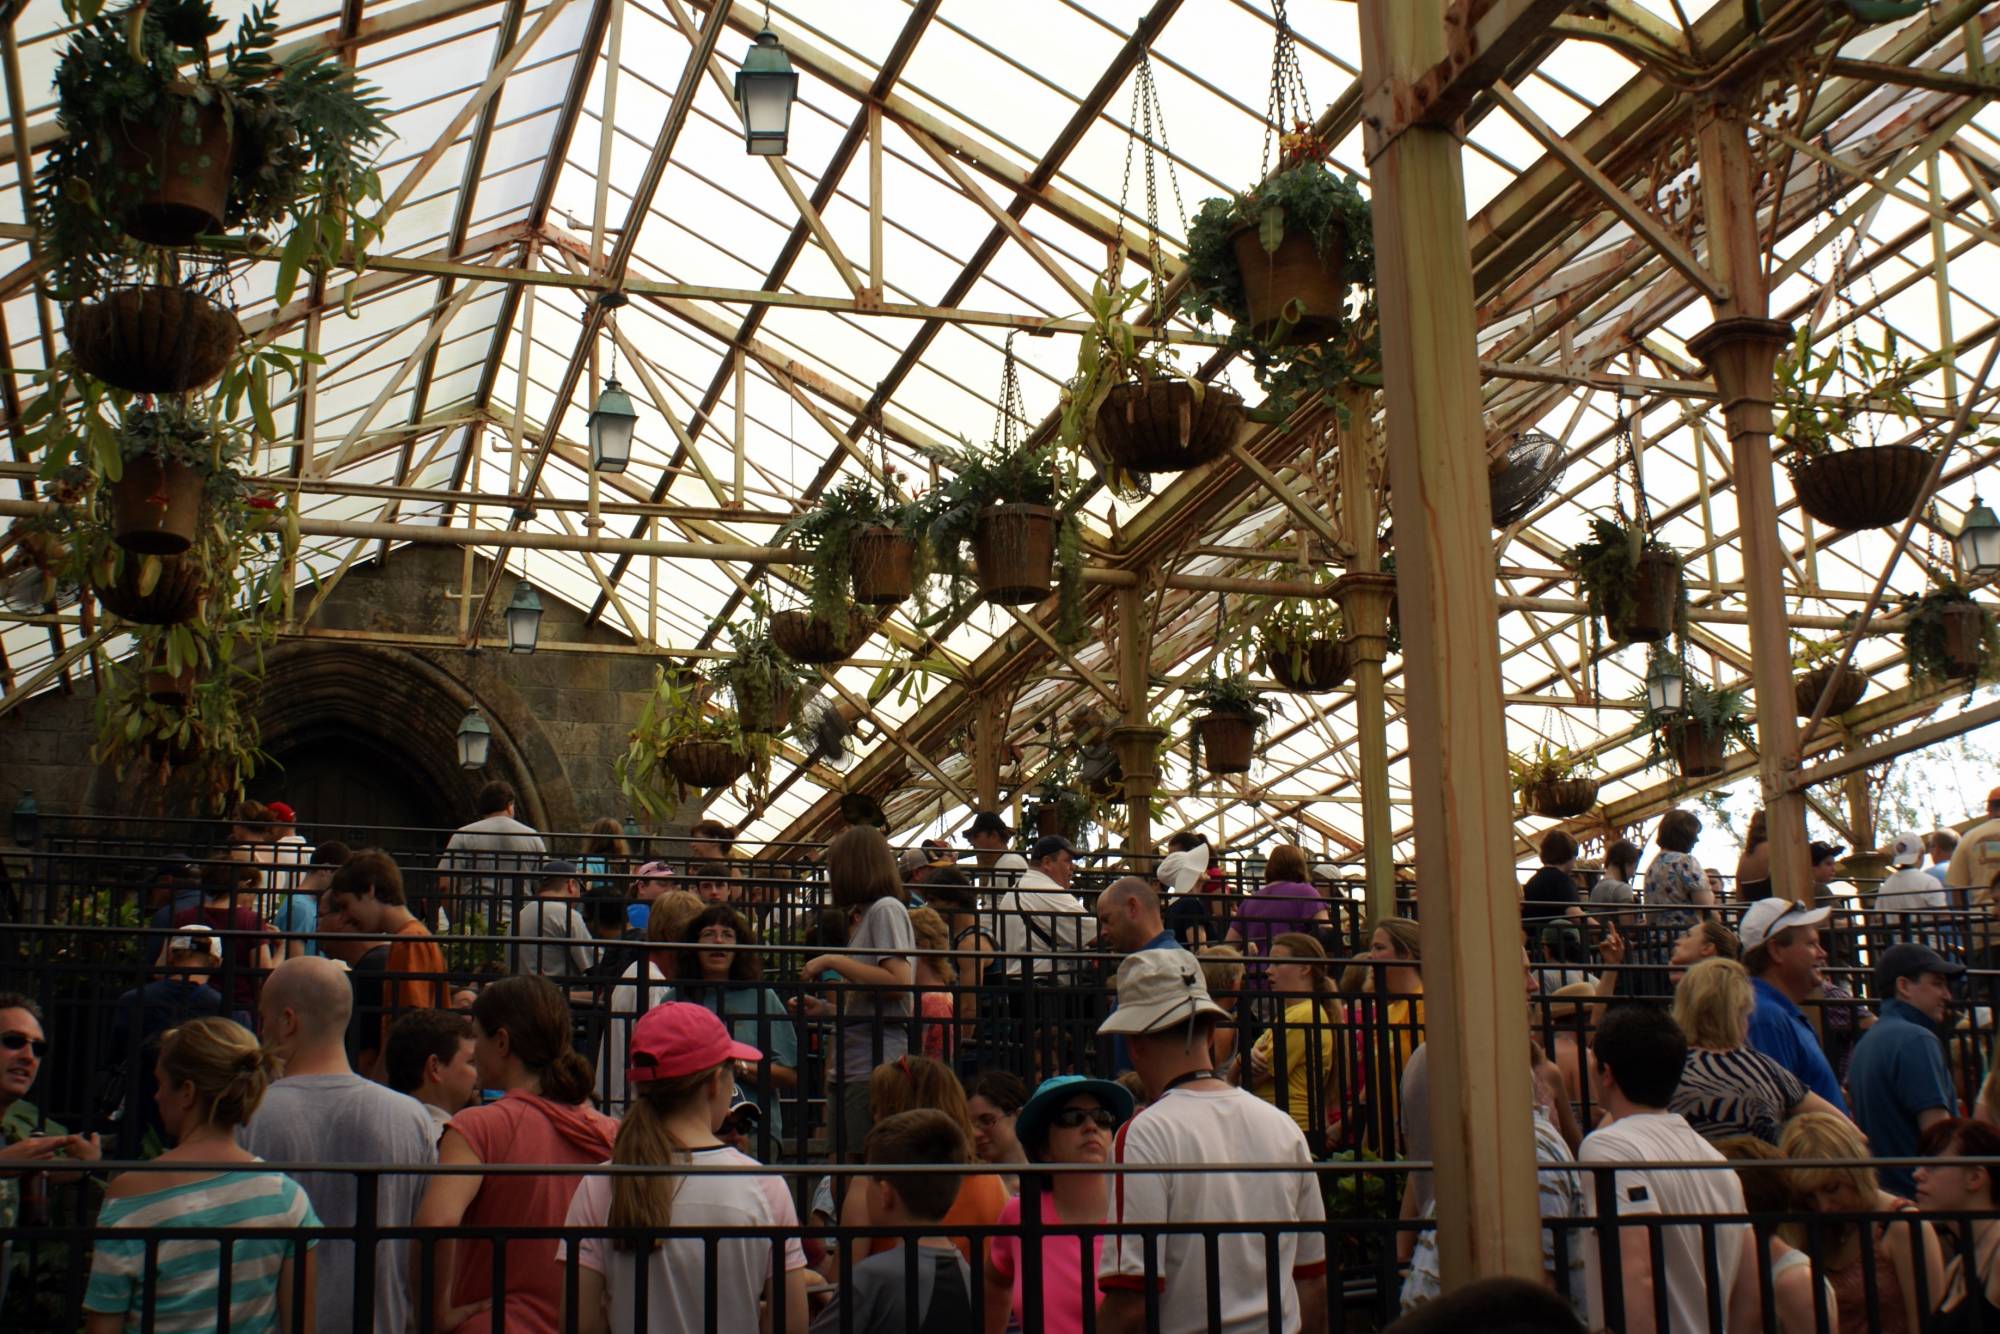 Greenhouse leading into Forbidden Journey